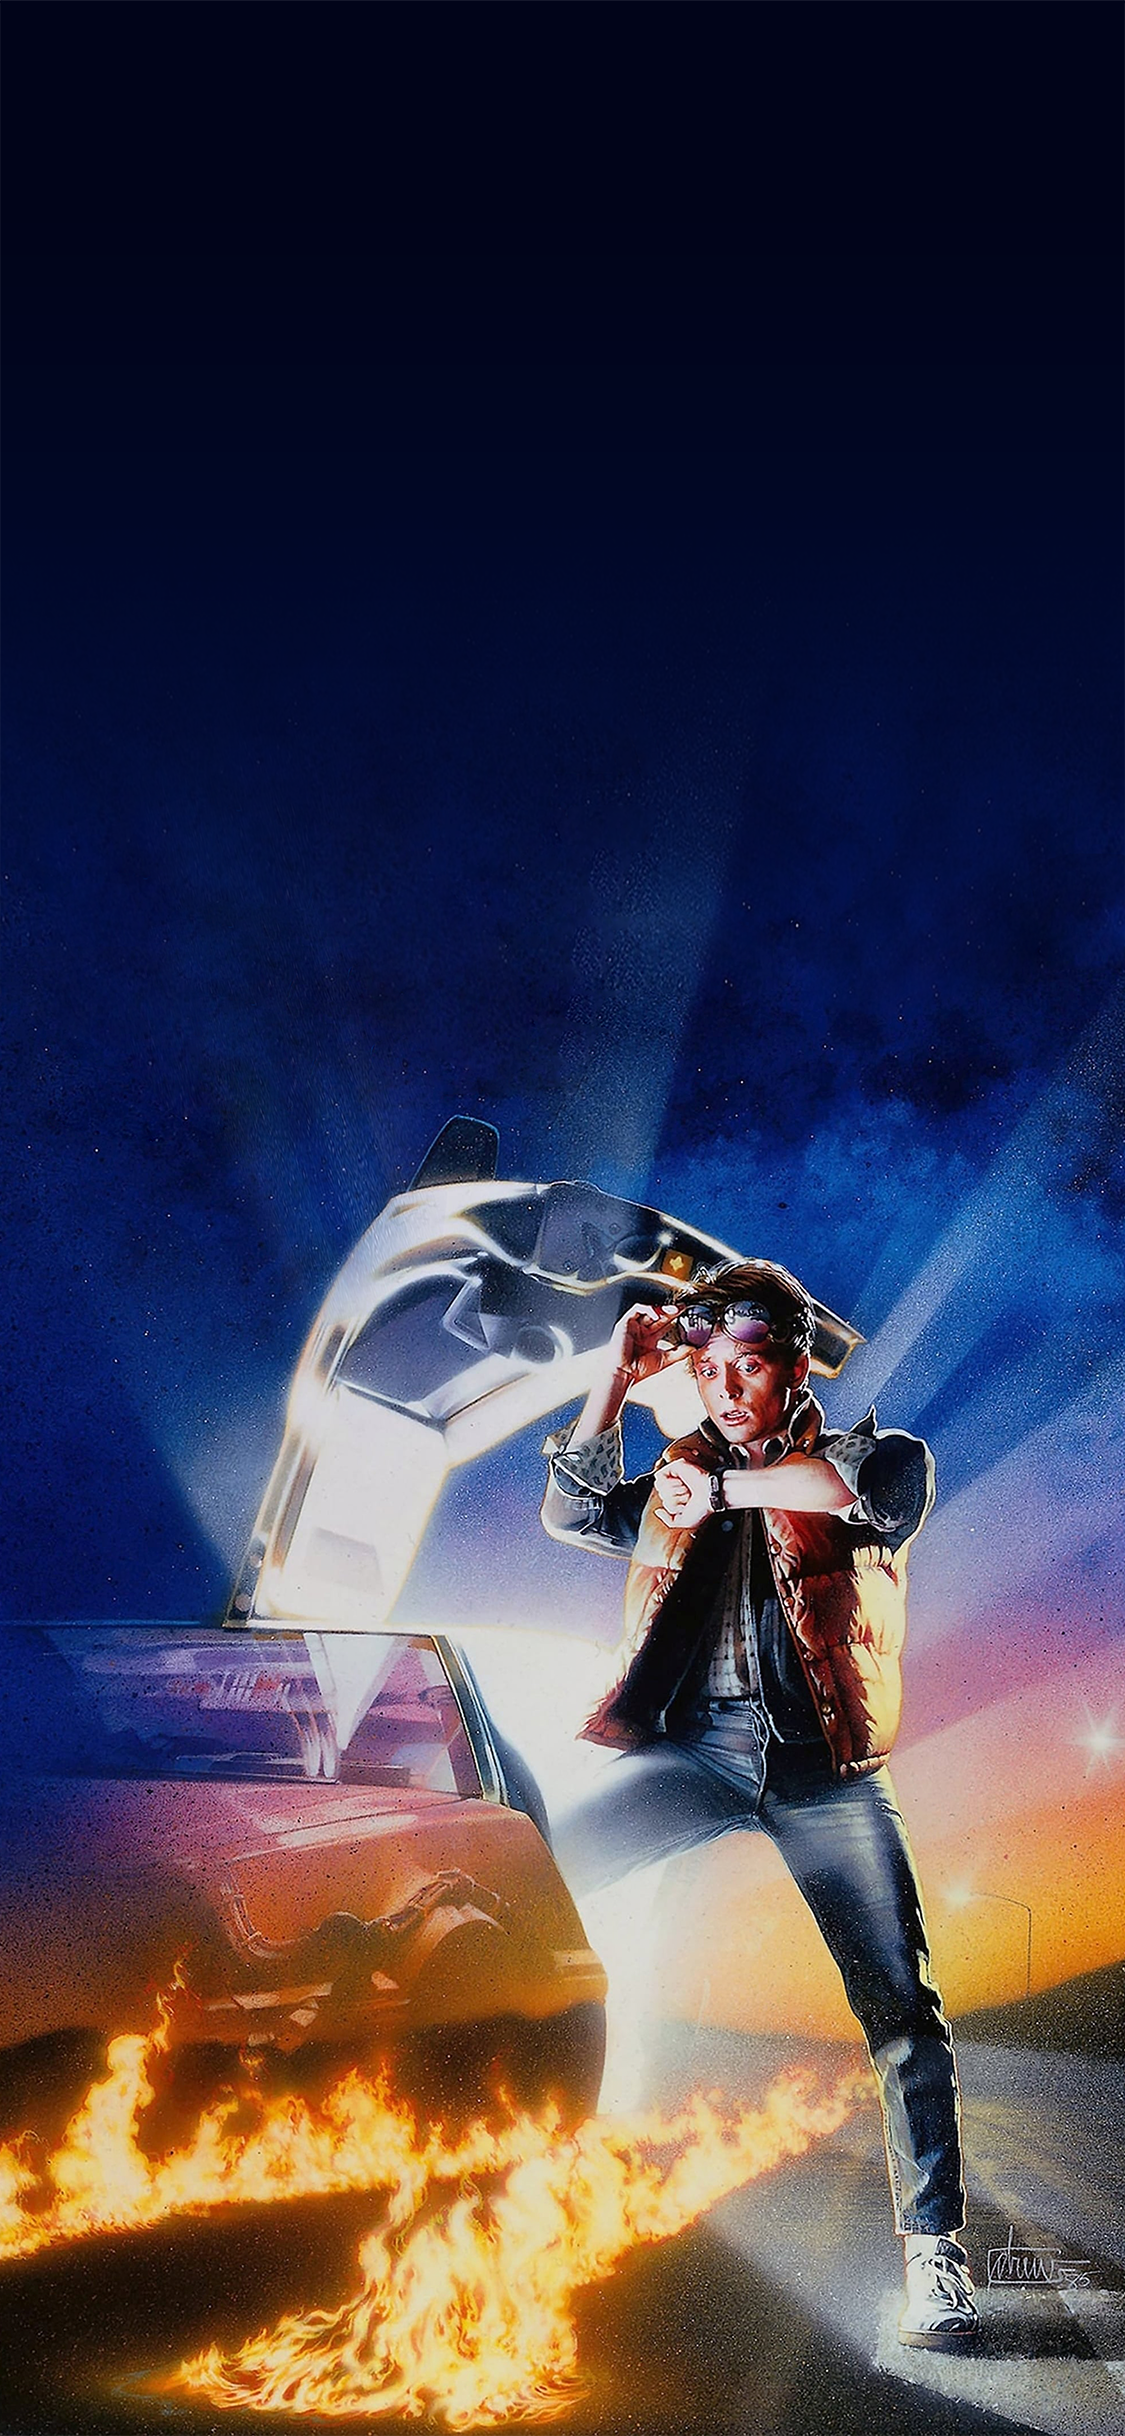 Removed The Text From Back To Future Poster And Made It